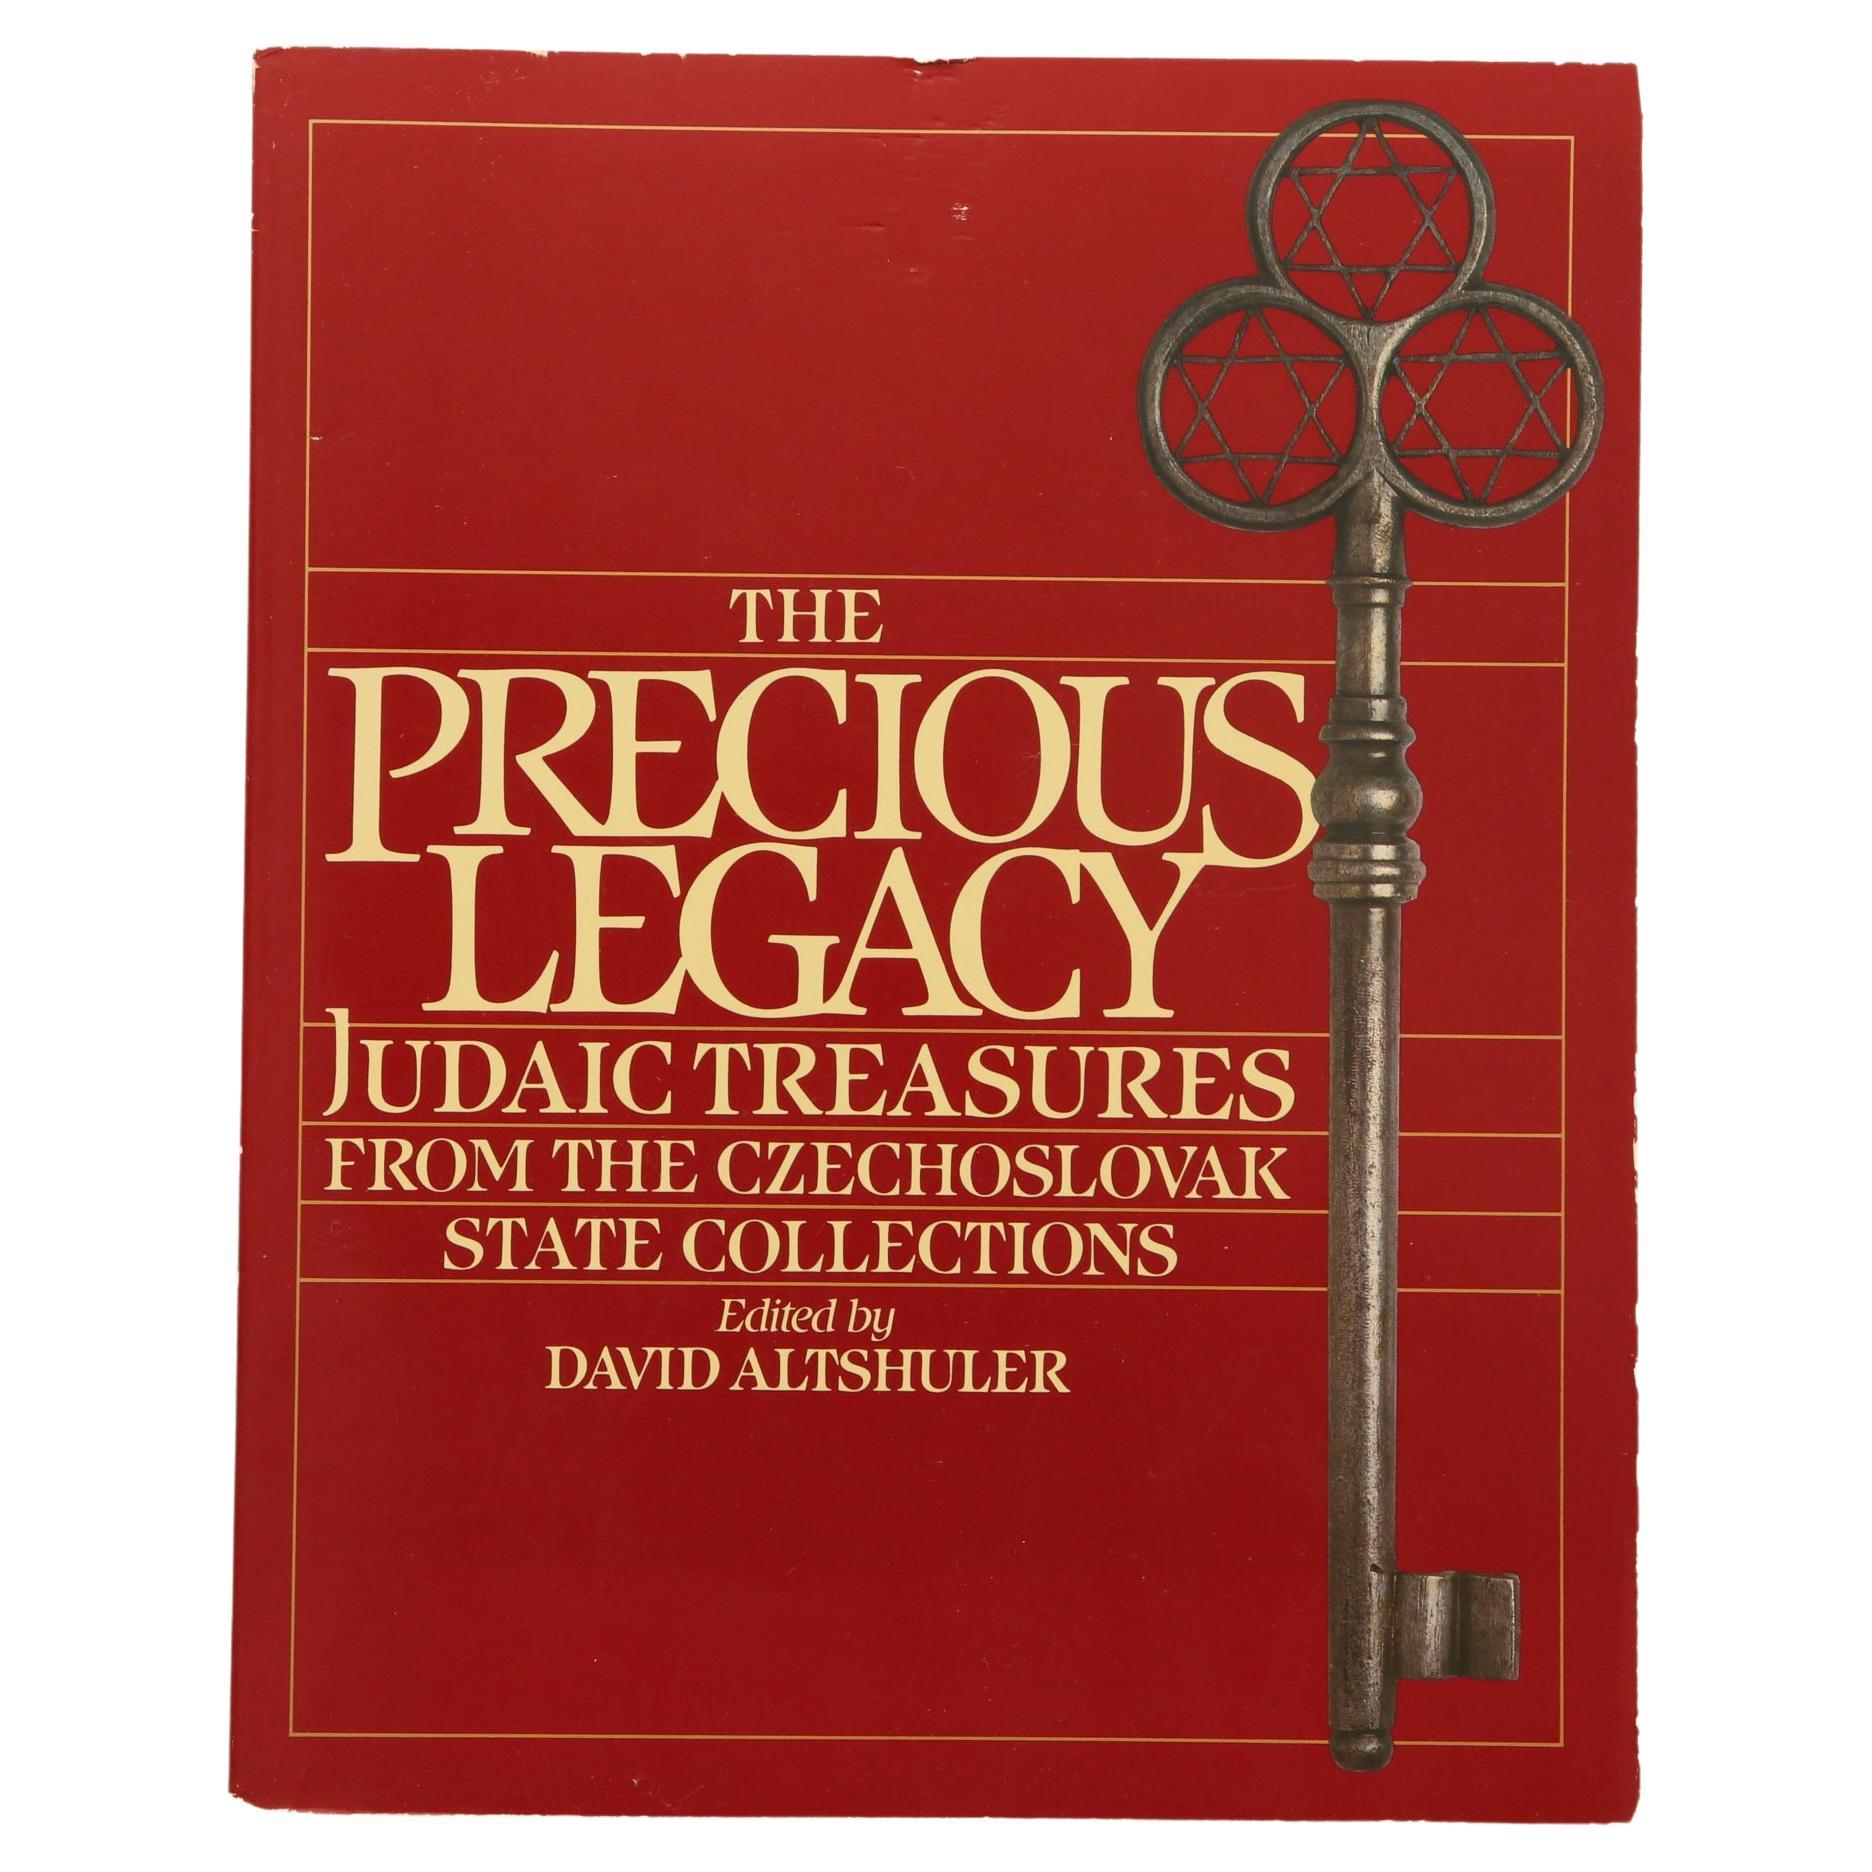 The Precious Legacy, Judaic Treasures From the Czechoslovak State Collections For Sale